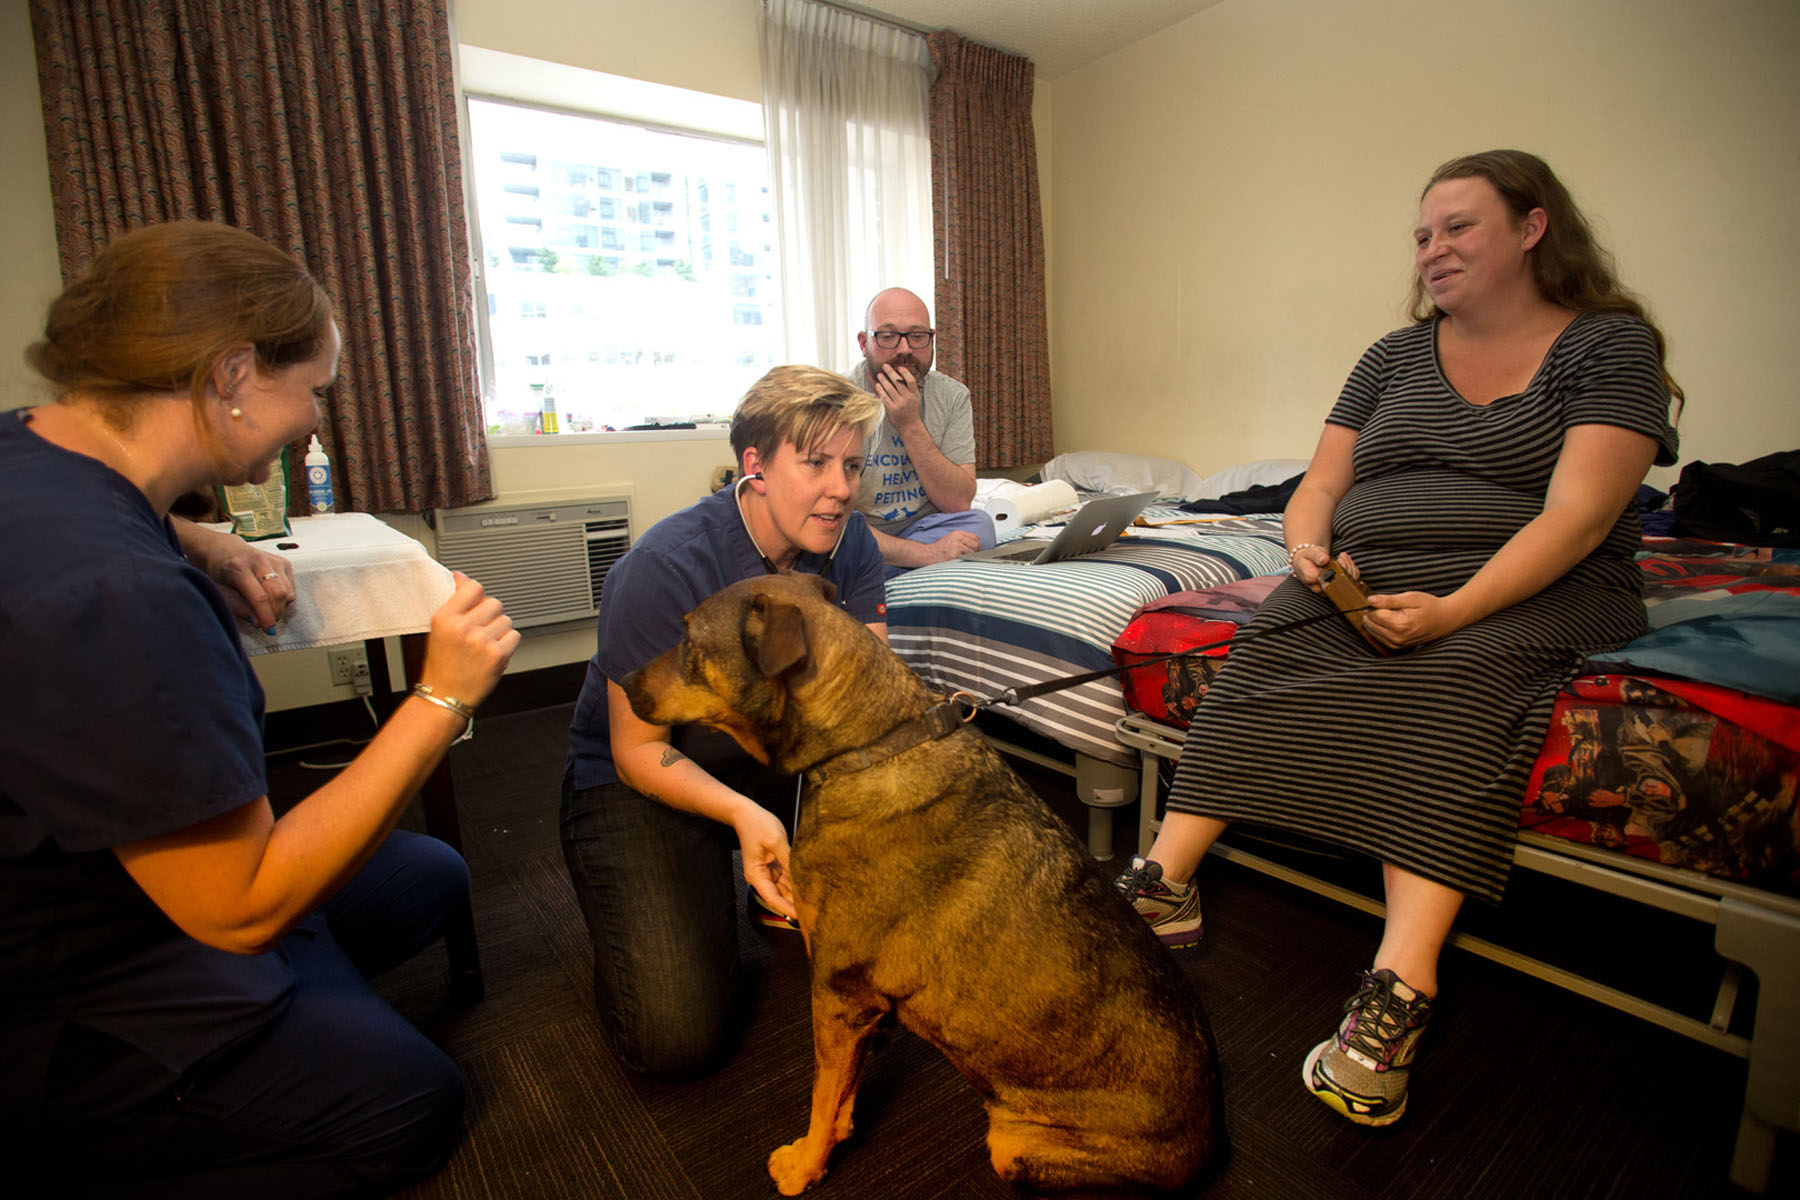 Dr. Cherri Trusheim (center) veterinarian and owner of Urban Animal, and her staff vet techs, Janna O’Connor (left)band Rob Oatman (right) check on Momma, a seven year old rottweiler-shepherd mix belonging to Mary Delp (seated) at Mary’s Place new Guest Rooms crisis response shelter in South Lake Union in Seattle, WA on June 23, 2016. The vets provided check ups and medical care to homeless dogs and cats living at the shelter. (photo © Karen Ducey Photography)